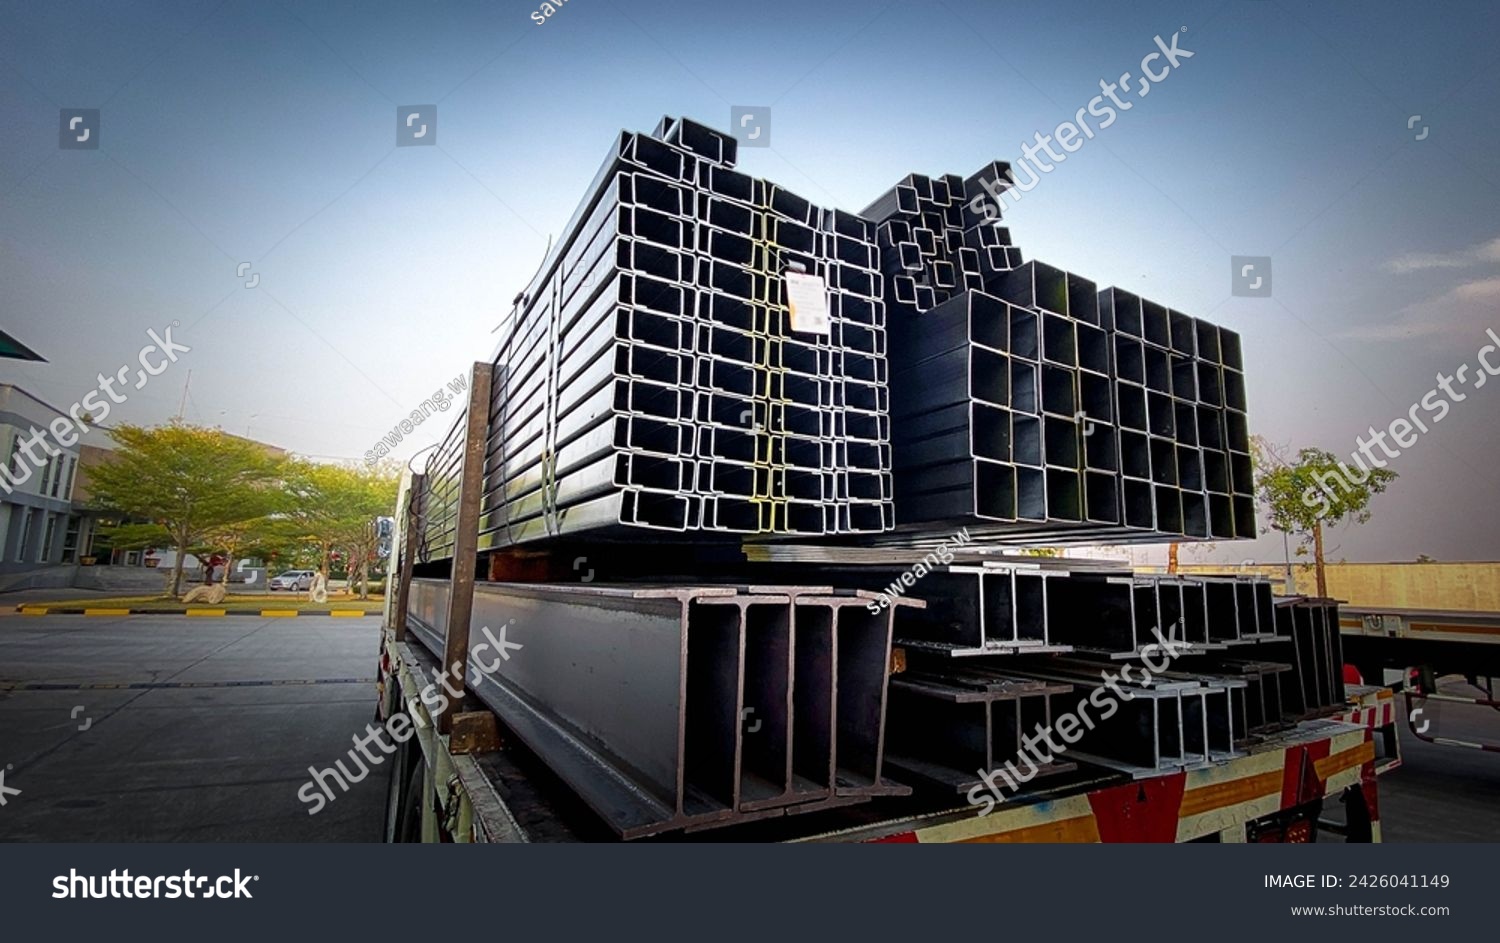 Trucks with long trailers carrying steel bars for building construction. Construction steel is ready to be delivered to the customer.Steel in thailand #2426041149